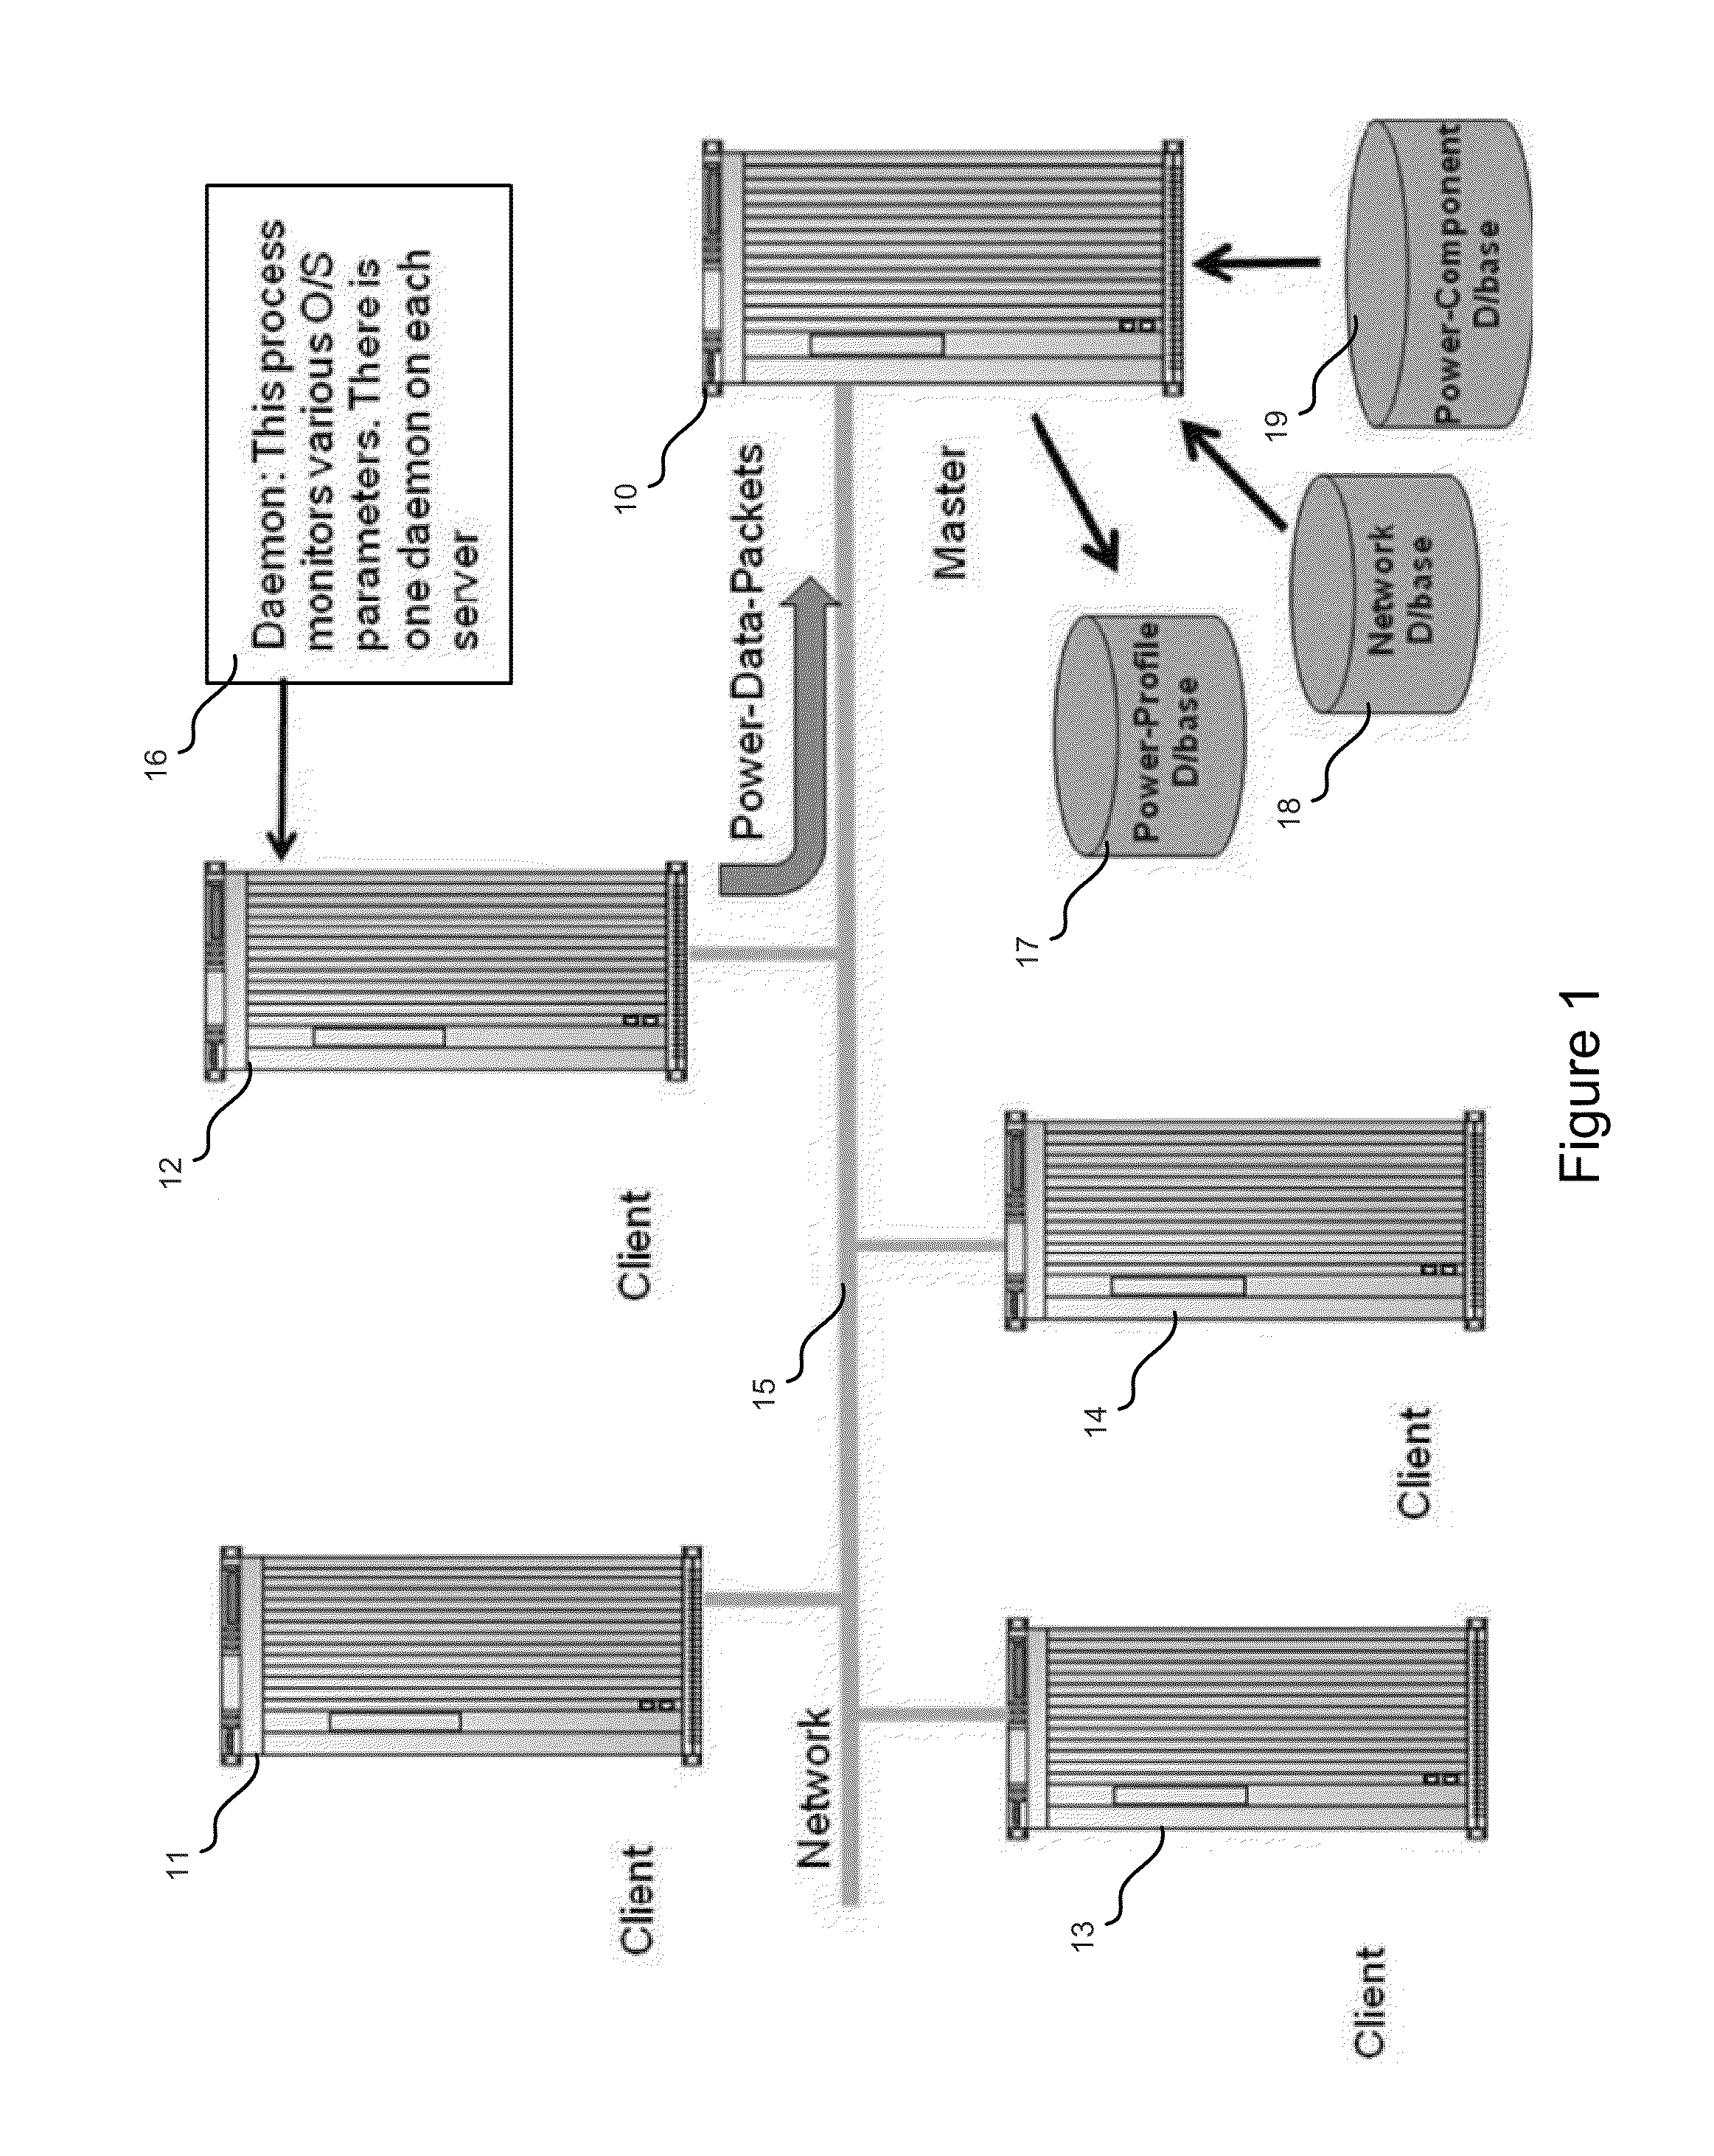 Power profiling and auditing consumption systems and methods